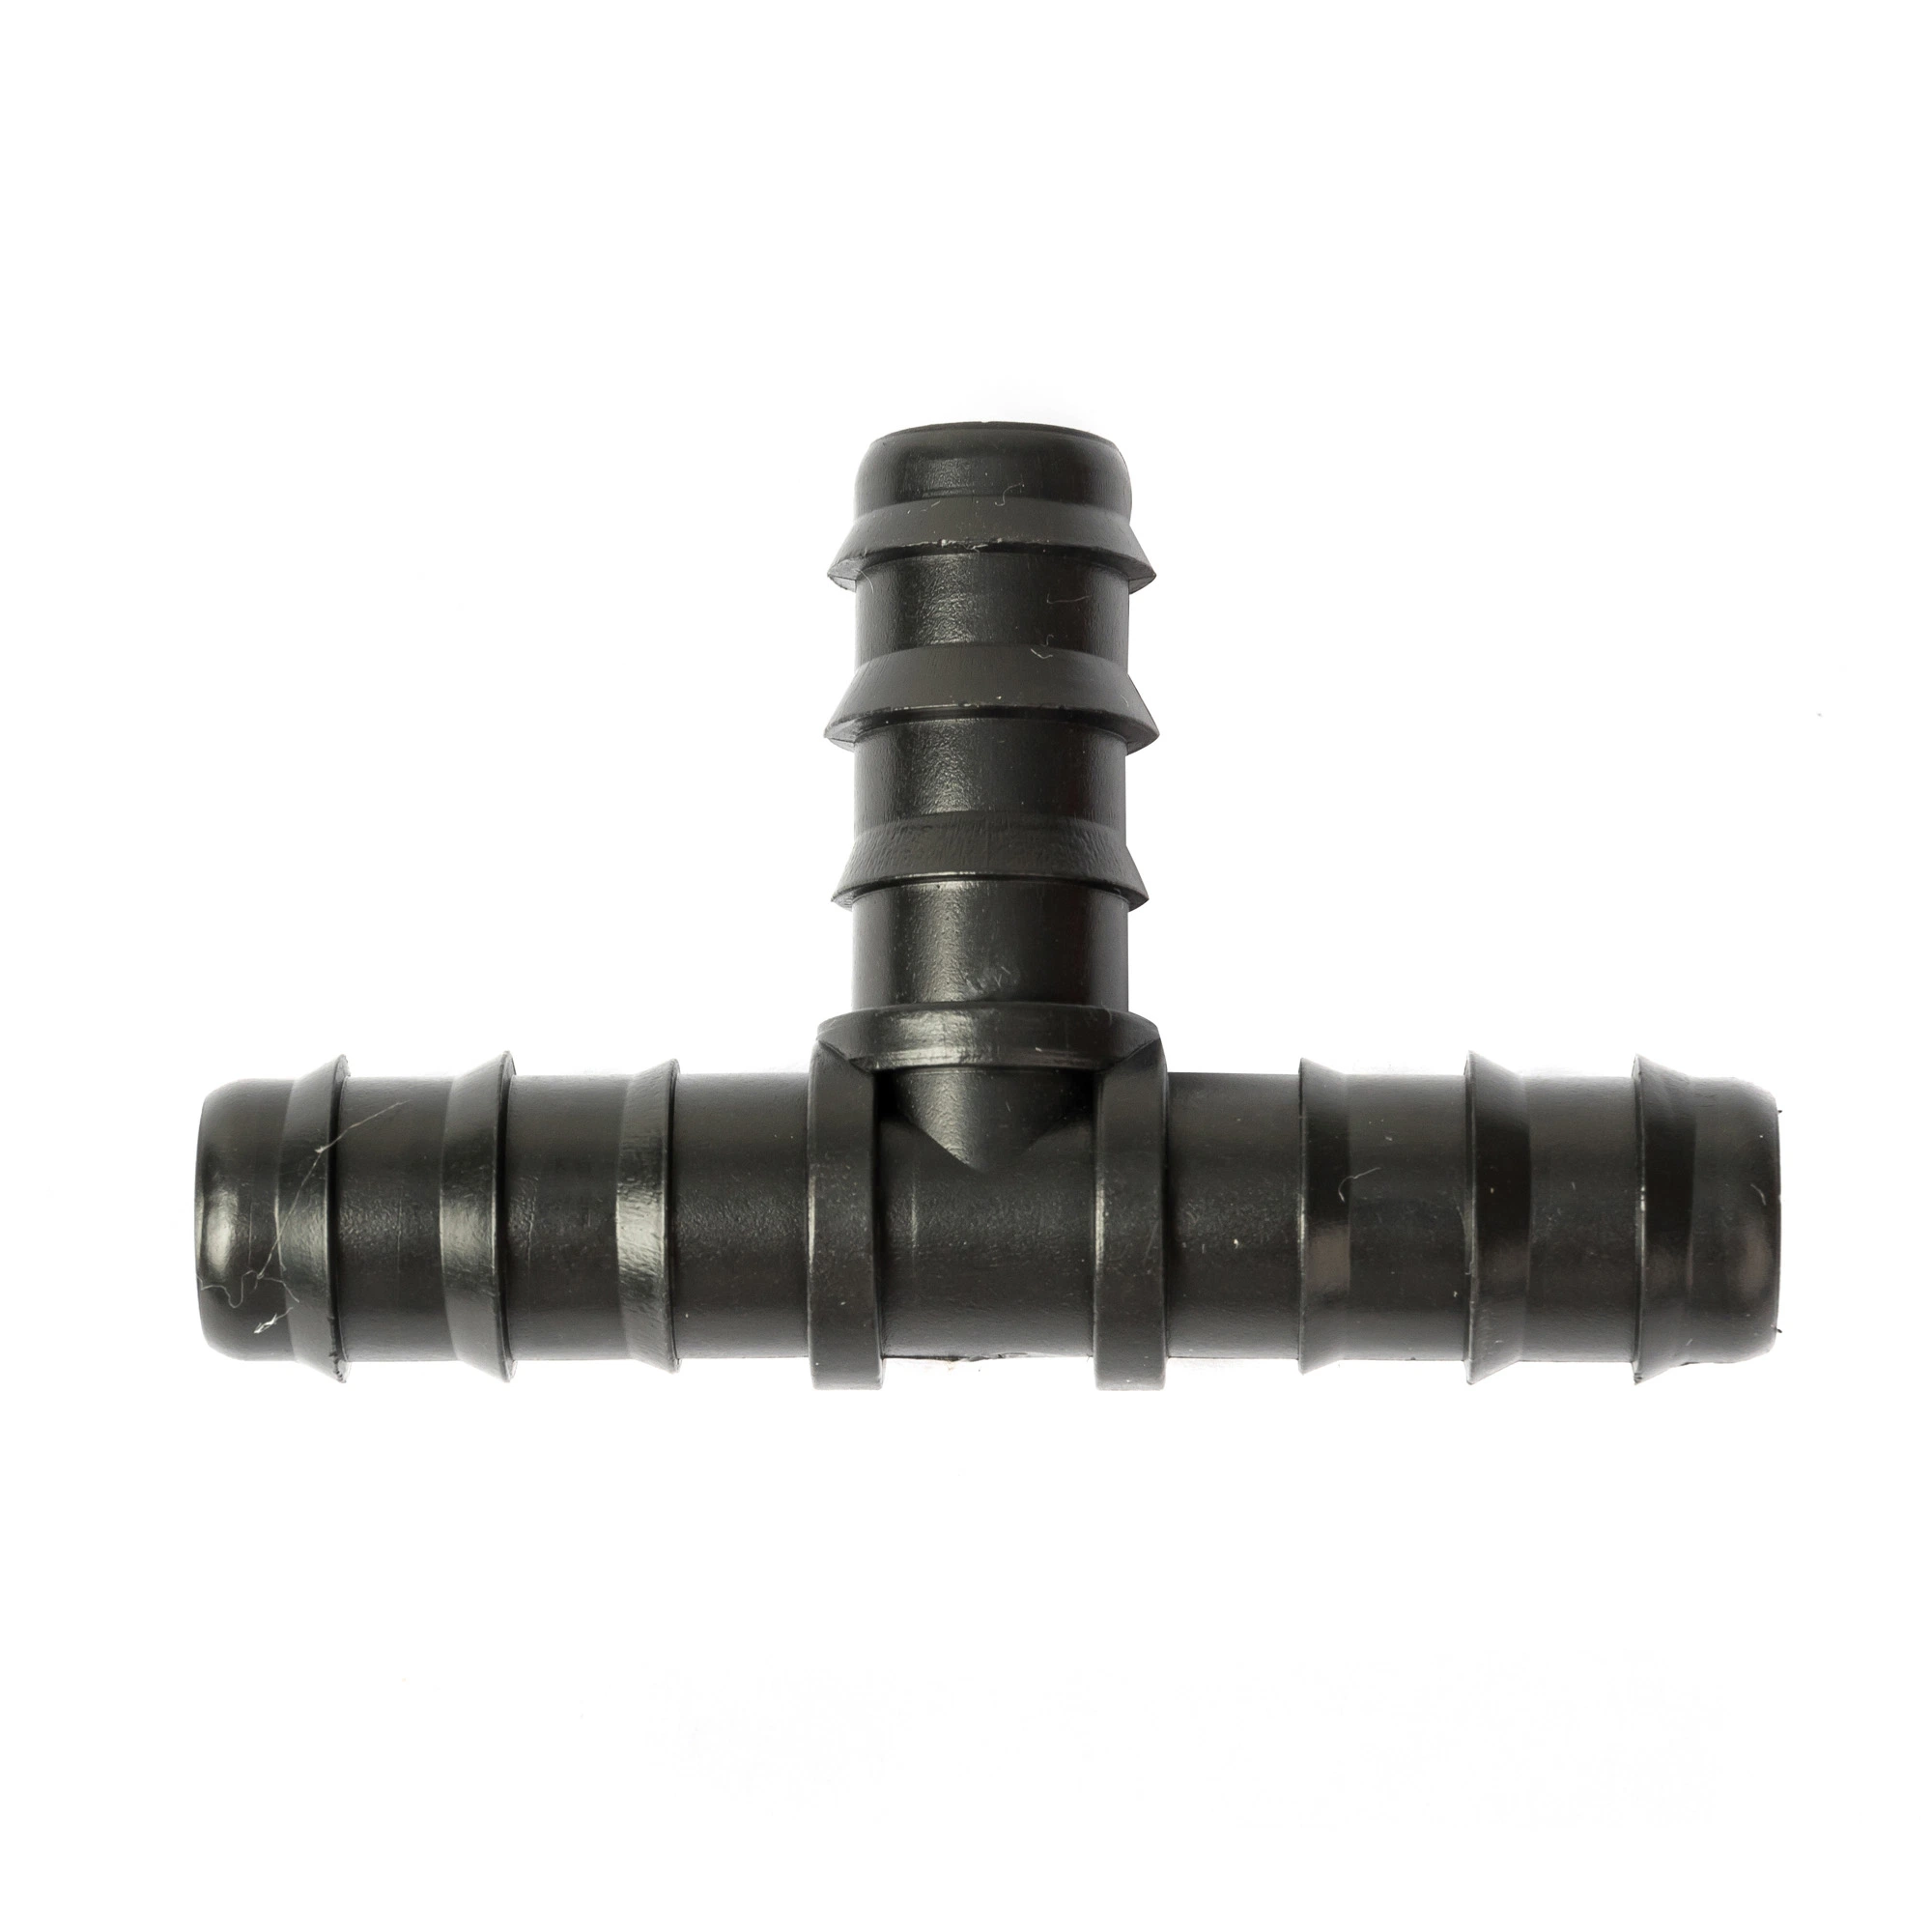 Wholesale Micro Drip Irrigation System Plastic Barbed Tee Irrigation Black Poly Pipe Fittings Connector